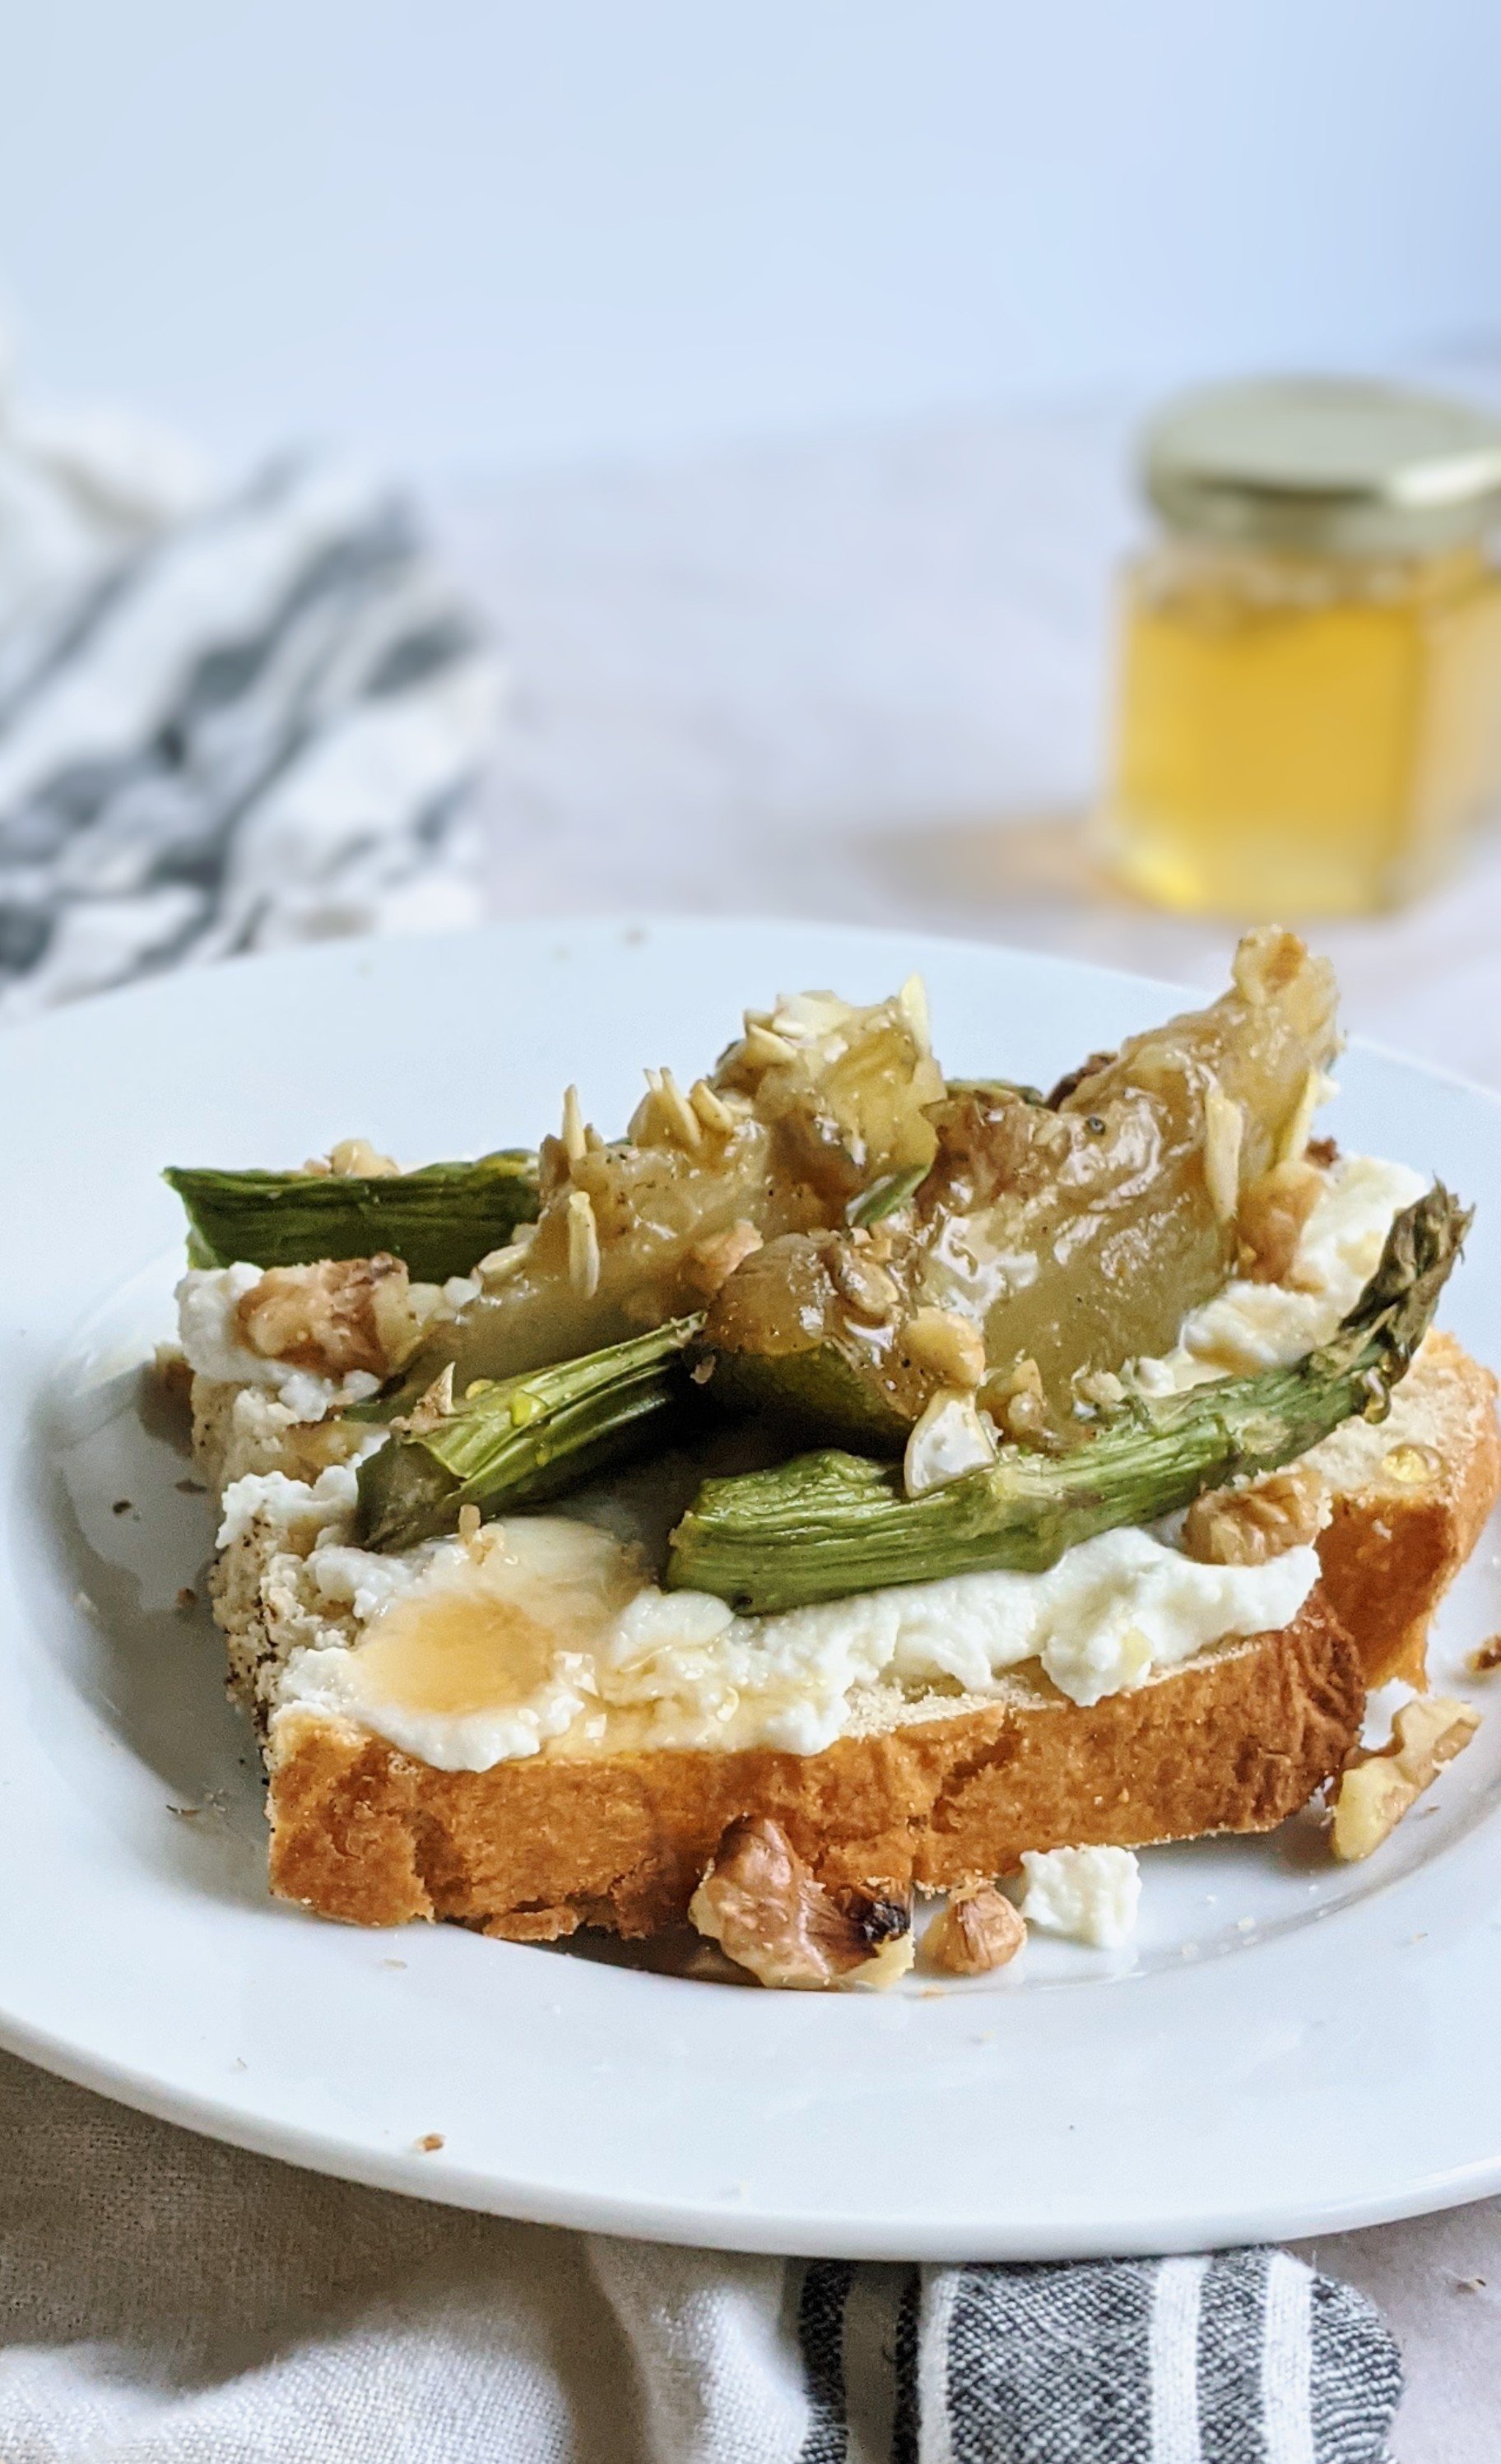 ricotta toast honey vegetables breakfast recipes healthy brunch ideas with asparagus and squash gluten free vegetarian brunch ideas for a crowd fancy breakfasts with veggies